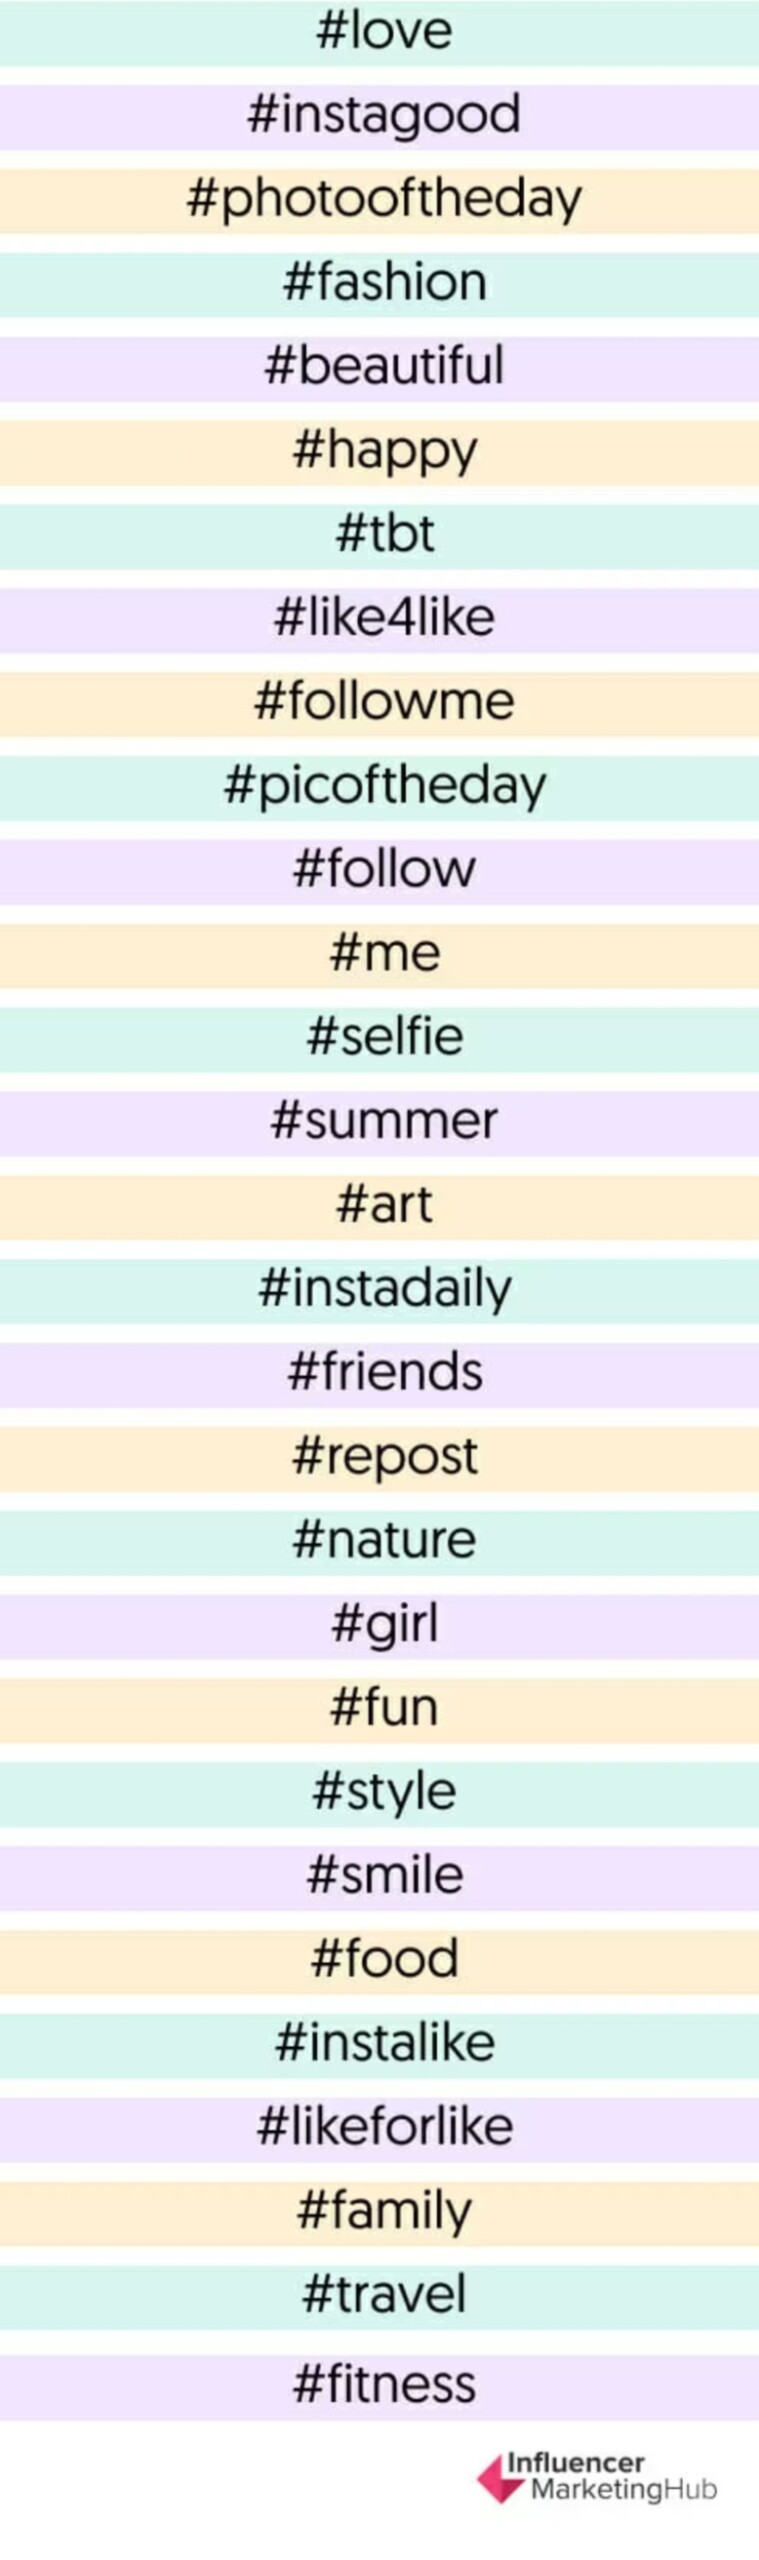 Most Popular Instagram Hashtags to Get More Reach - SocialGyan